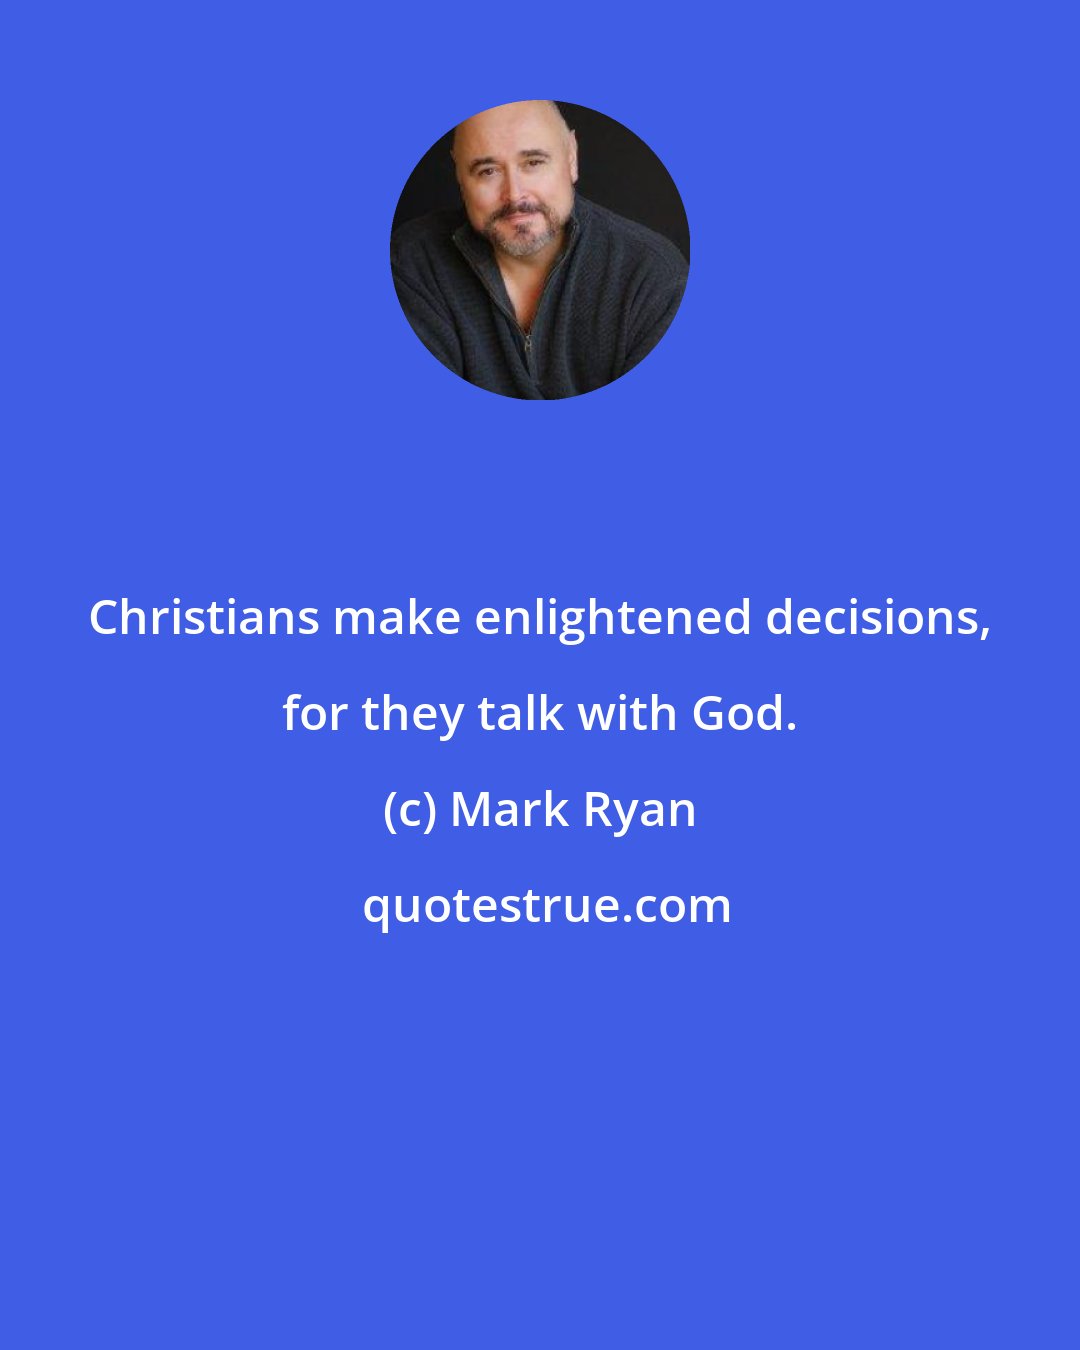 Mark Ryan: Christians make enlightened decisions, for they talk with God.